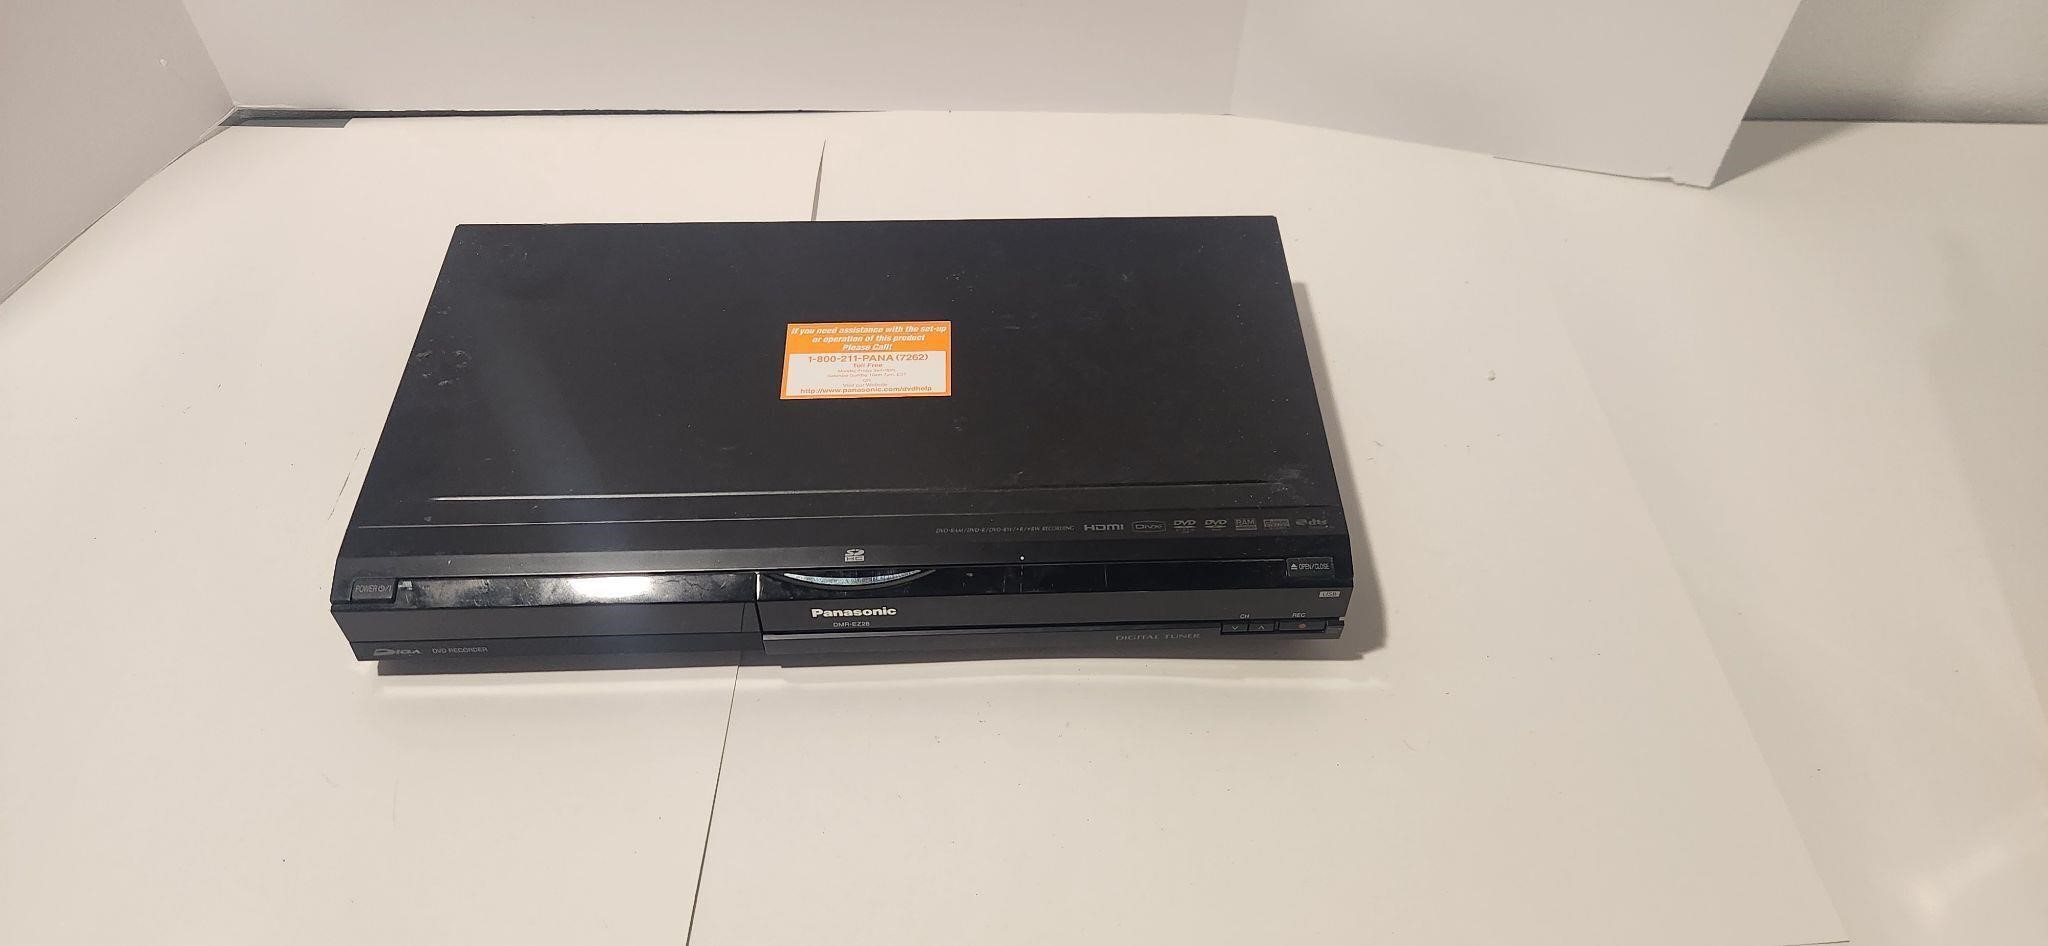 Consignment Auction - Electronics, Housewares, and More!